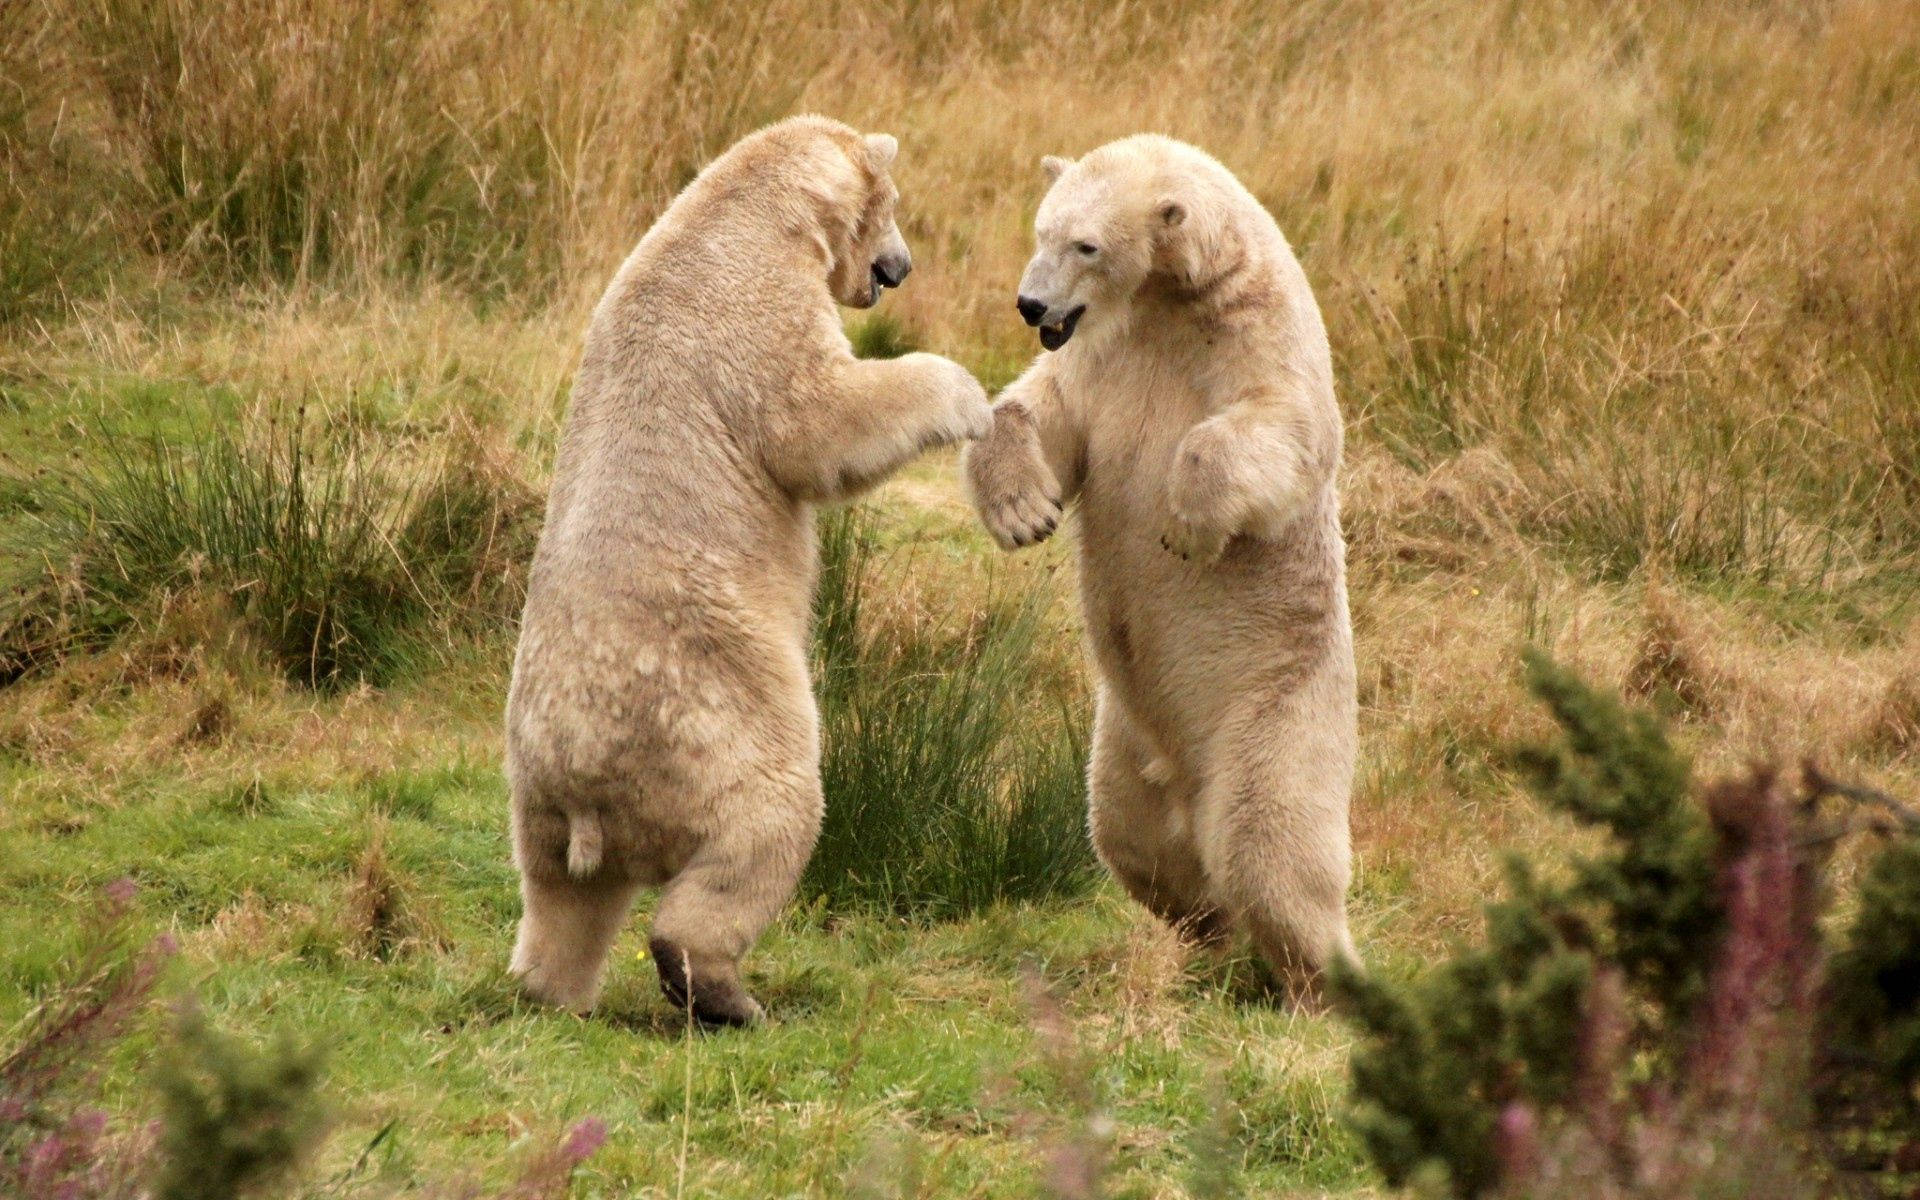 Two threatening polar bears locked in a tense stand-off Wallpaper